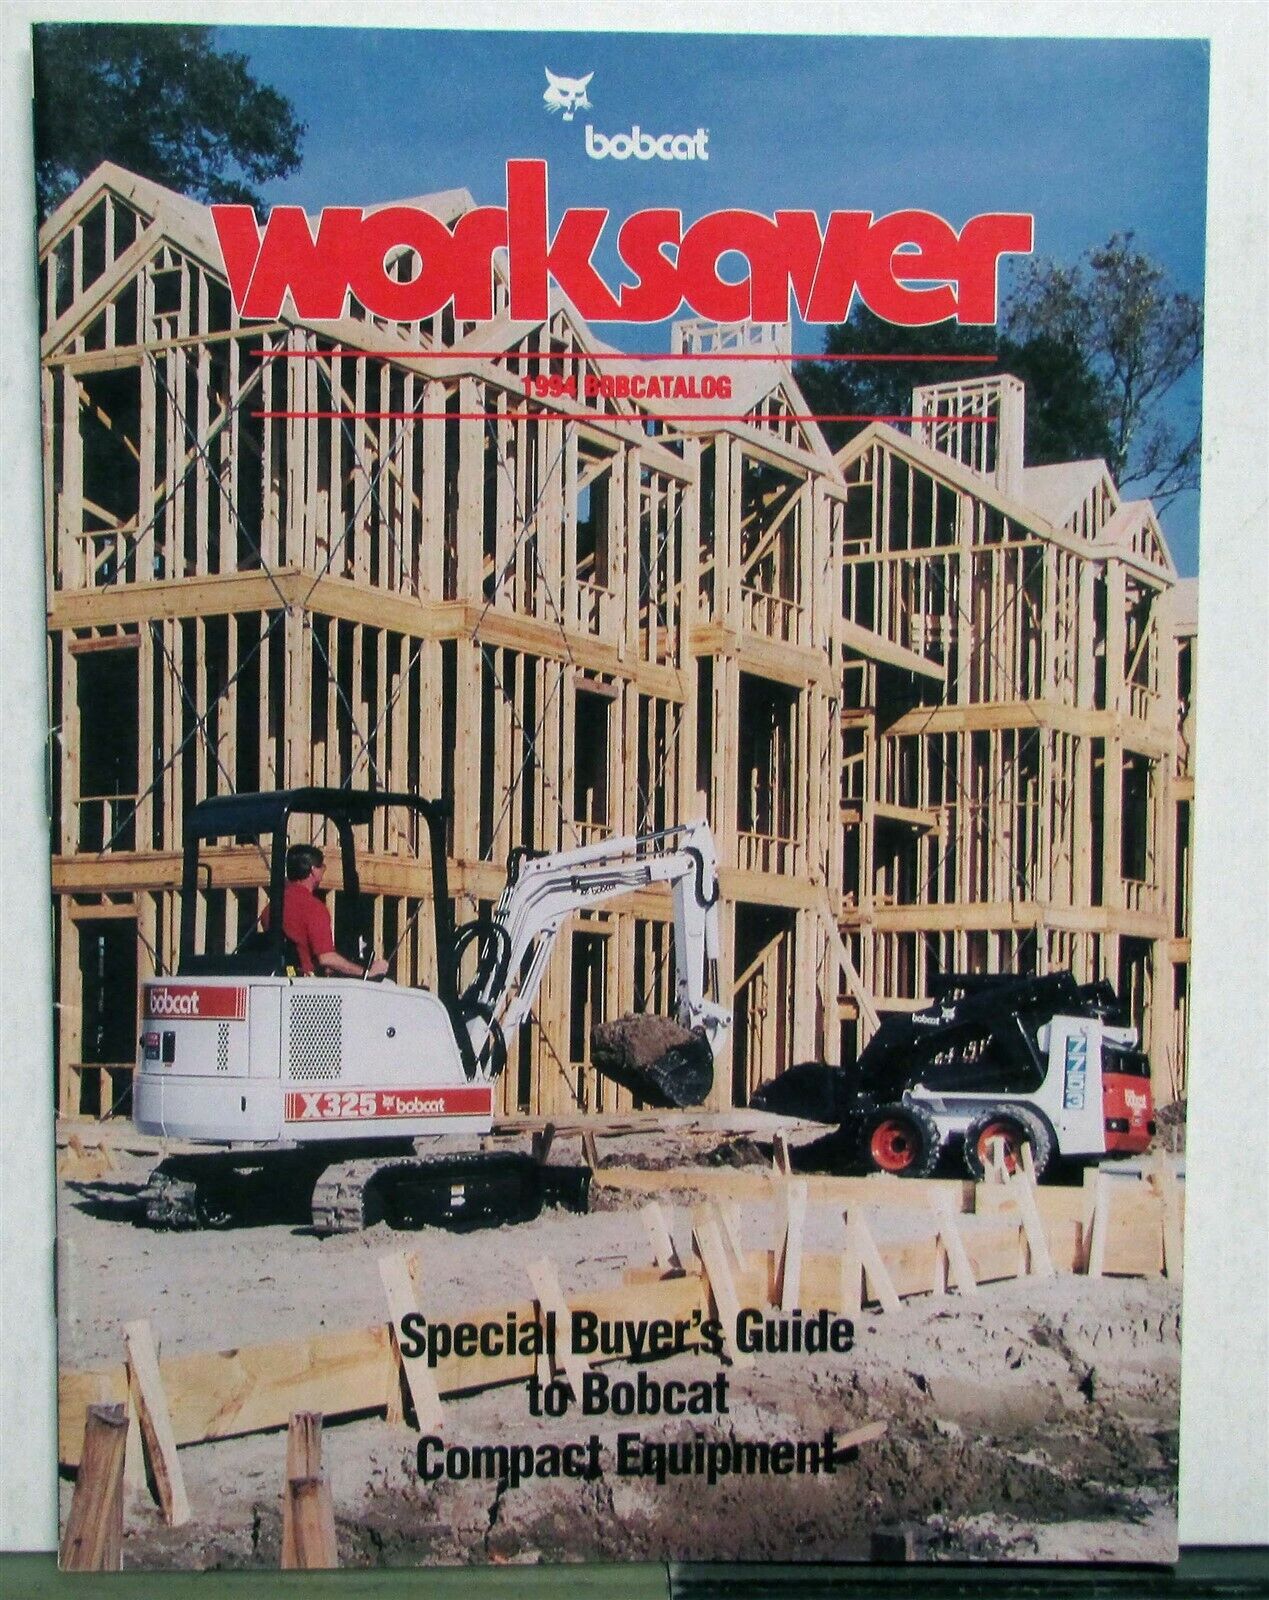 1994 Bobcat WorkSaver Compact Equipment Construction Buyers Guide